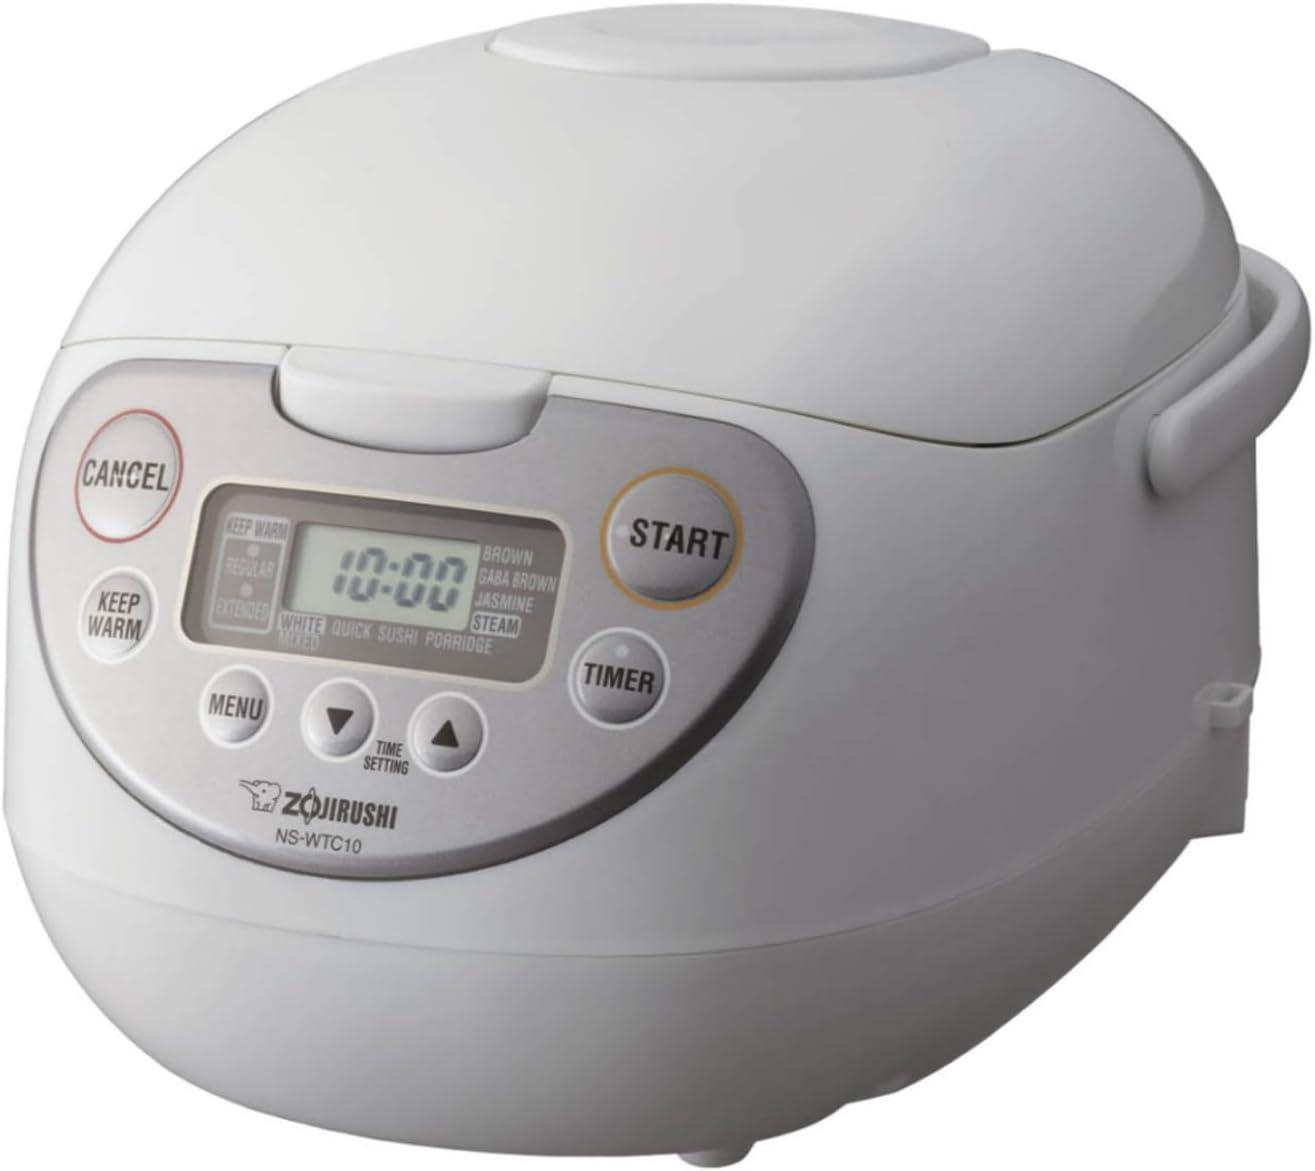 Zojirushi 5.5-Cup Micom Rice Cooker NS-WTC10 for $113.99 Shipped